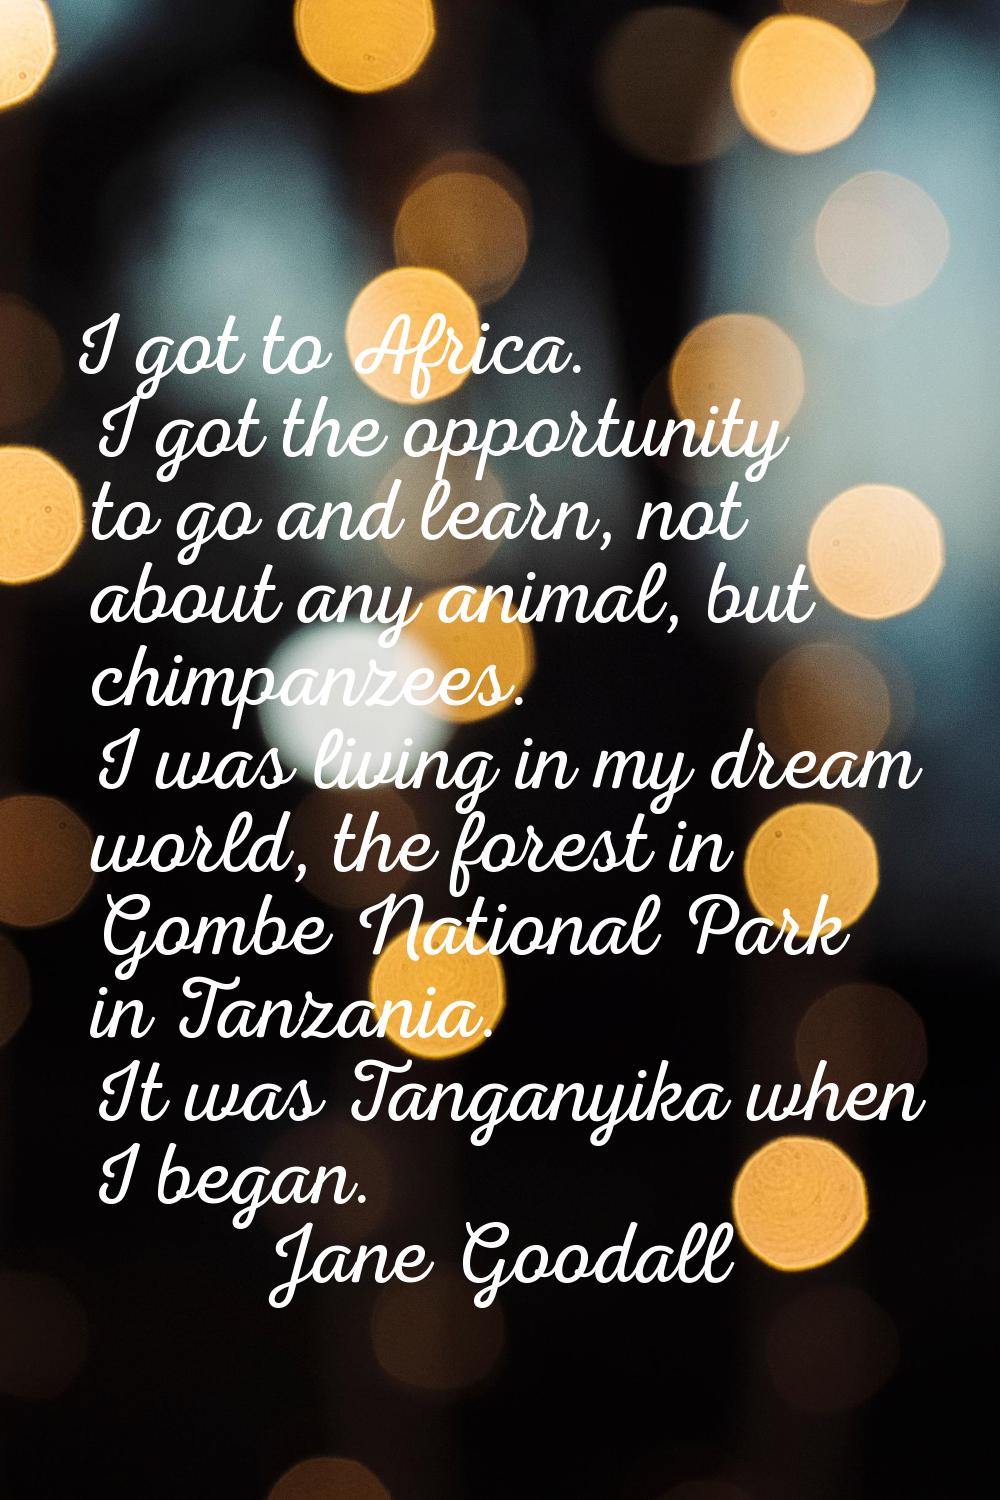 I got to Africa. I got the opportunity to go and learn, not about any animal, but chimpanzees. I wa